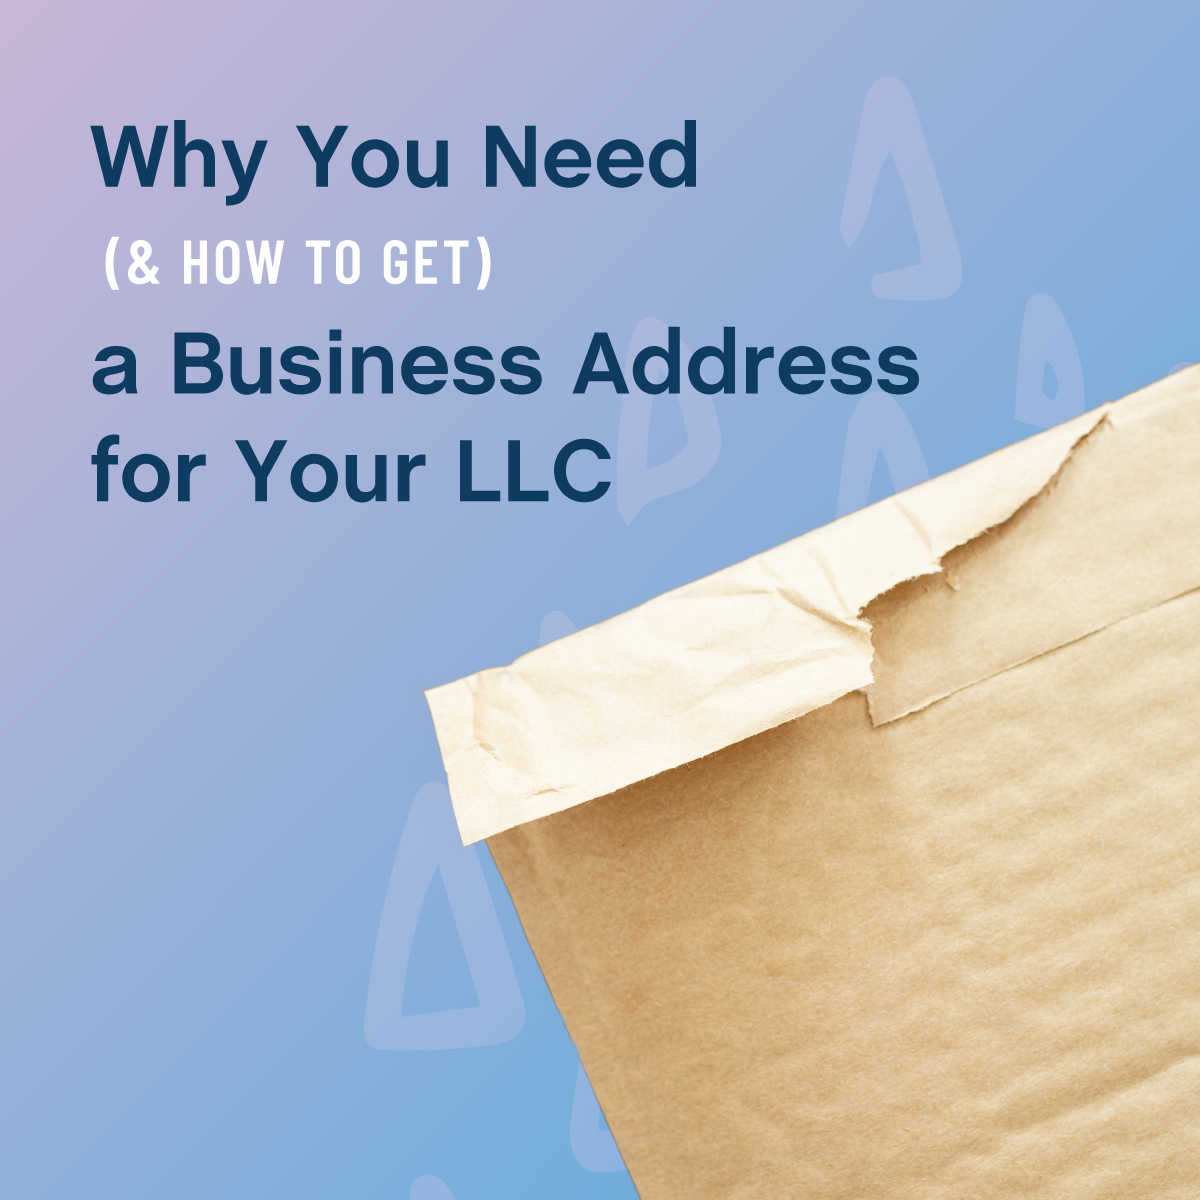 Why You Need (& How to Get) a Business Address for Your LLC